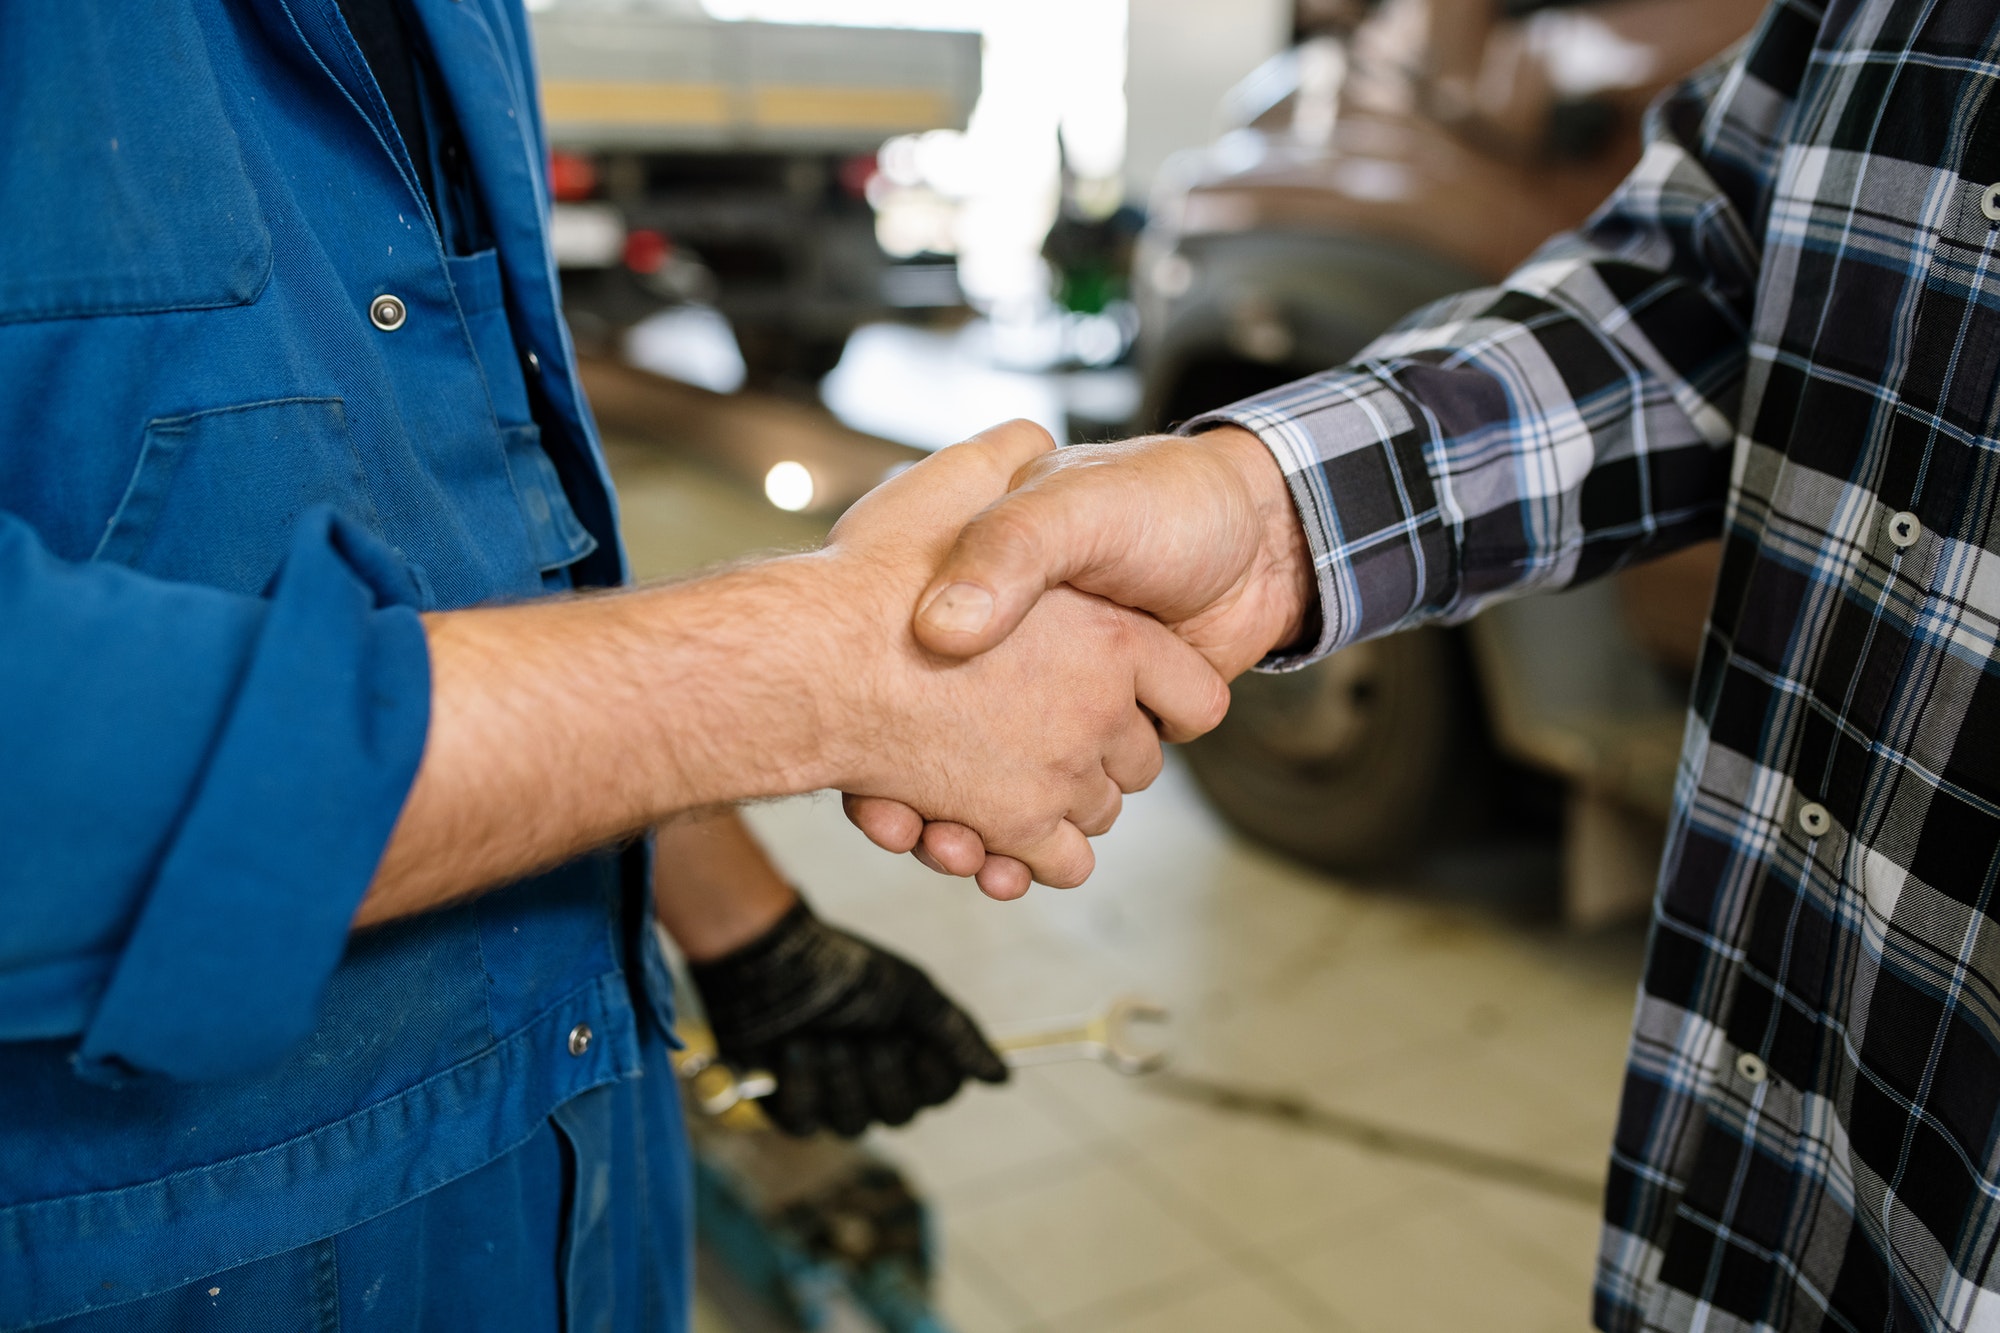 Young client of repair service and technician greeting one another by handshake